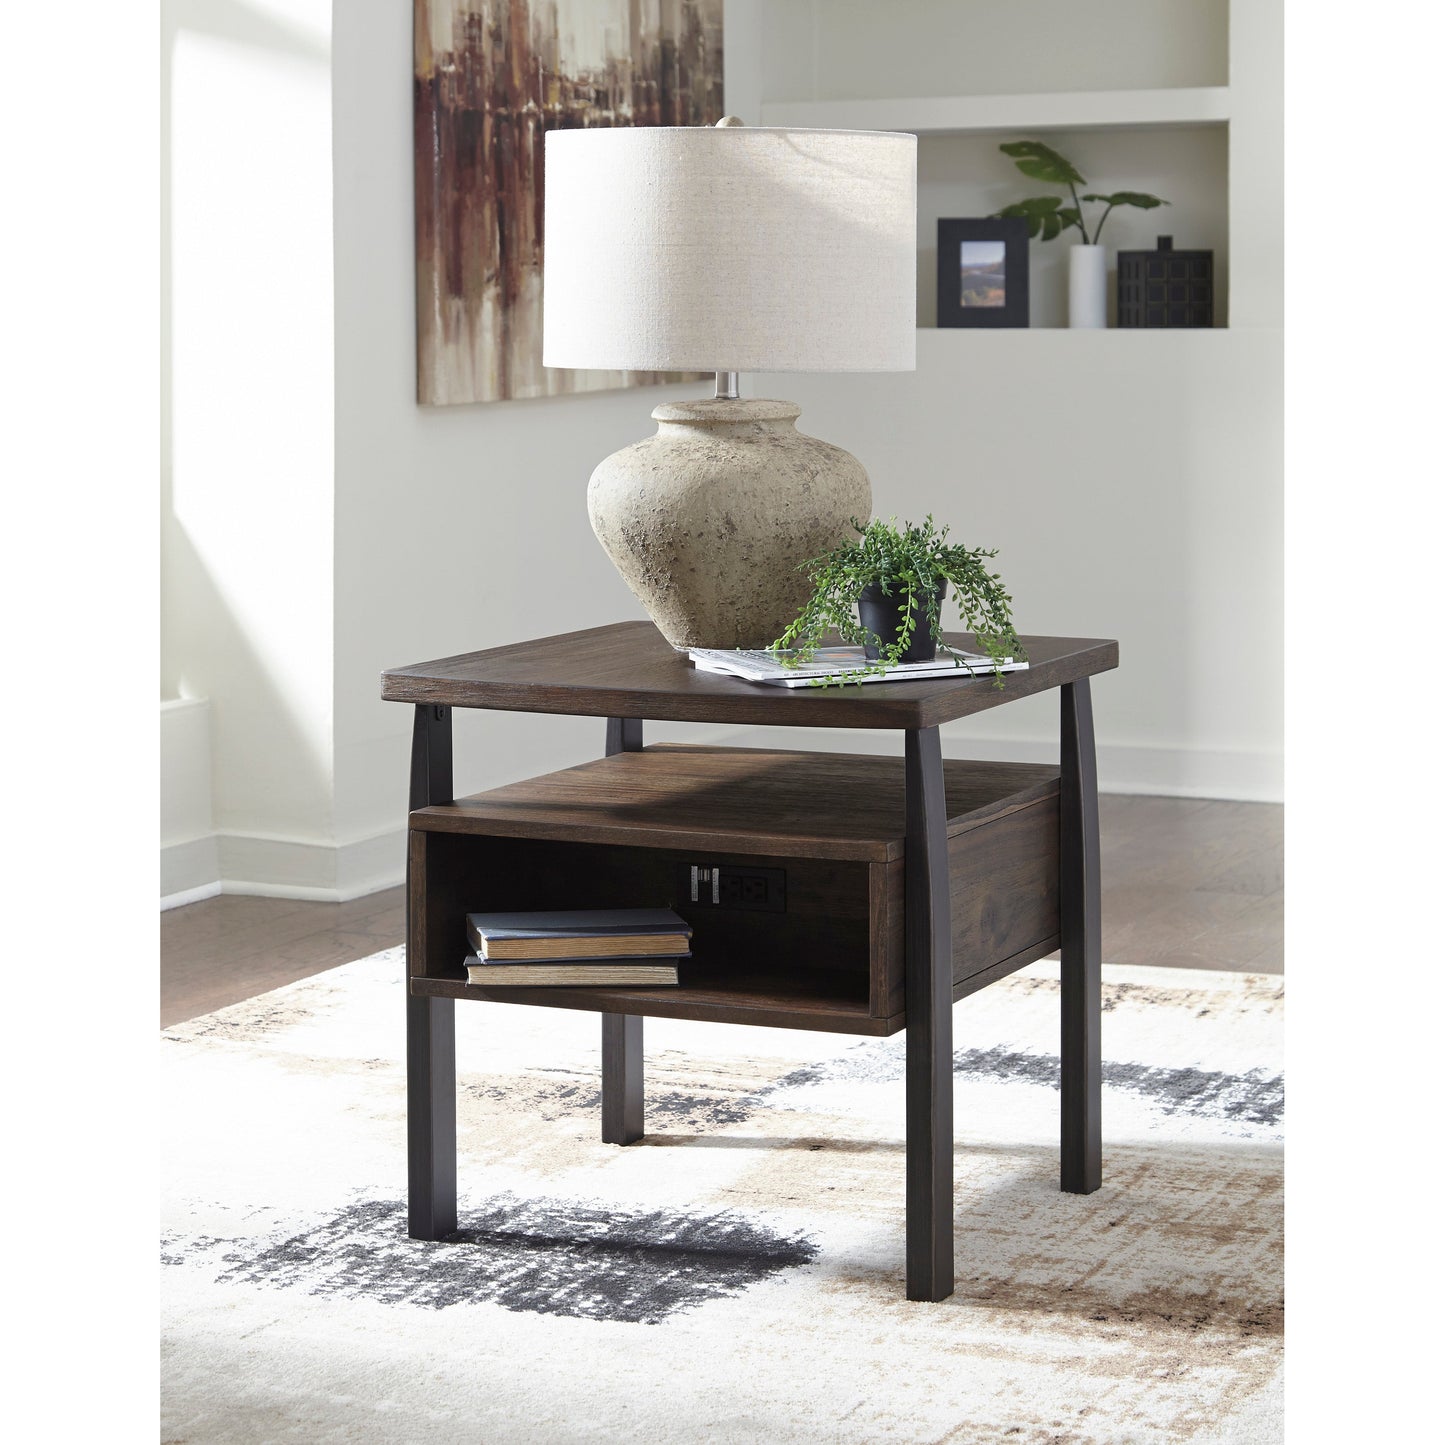 VAILBRY END TABLE - BROWN